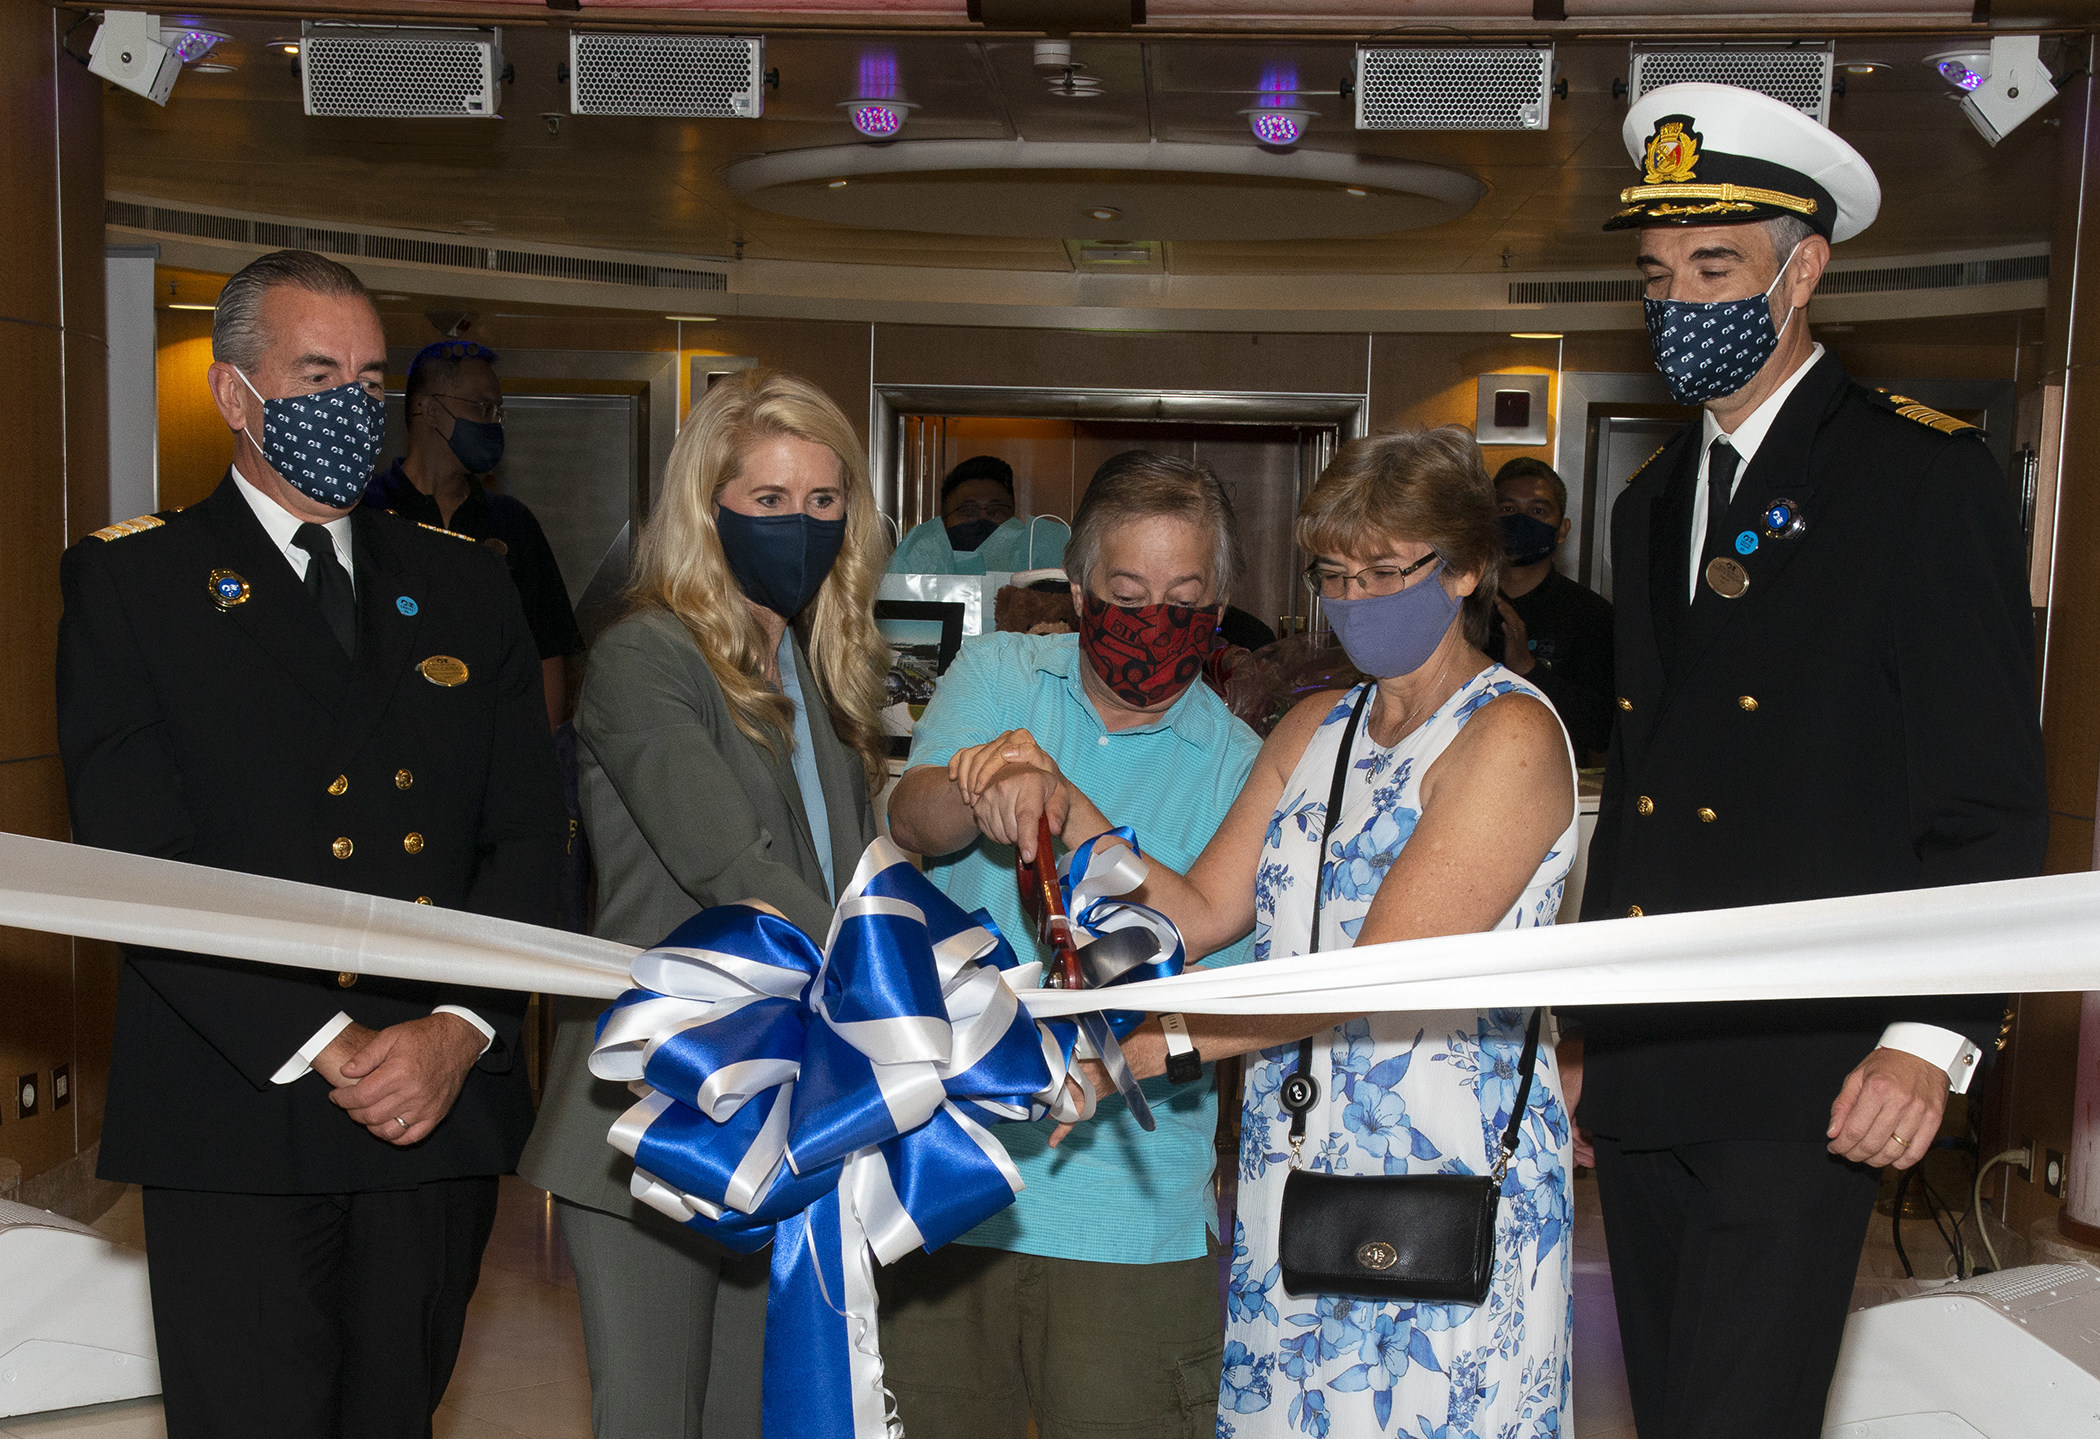 L-R: Hotel General Manager Riccardo Capraro, Princess Cruises President Jan Swartz, First Guests Blake and Lara Handler and Captain Andrea Spinardi celebrate Grand Princess return with ribbon cutting (Grand Princess First Ship to Set Sail from the Port of Los Angeles) (September 2021)